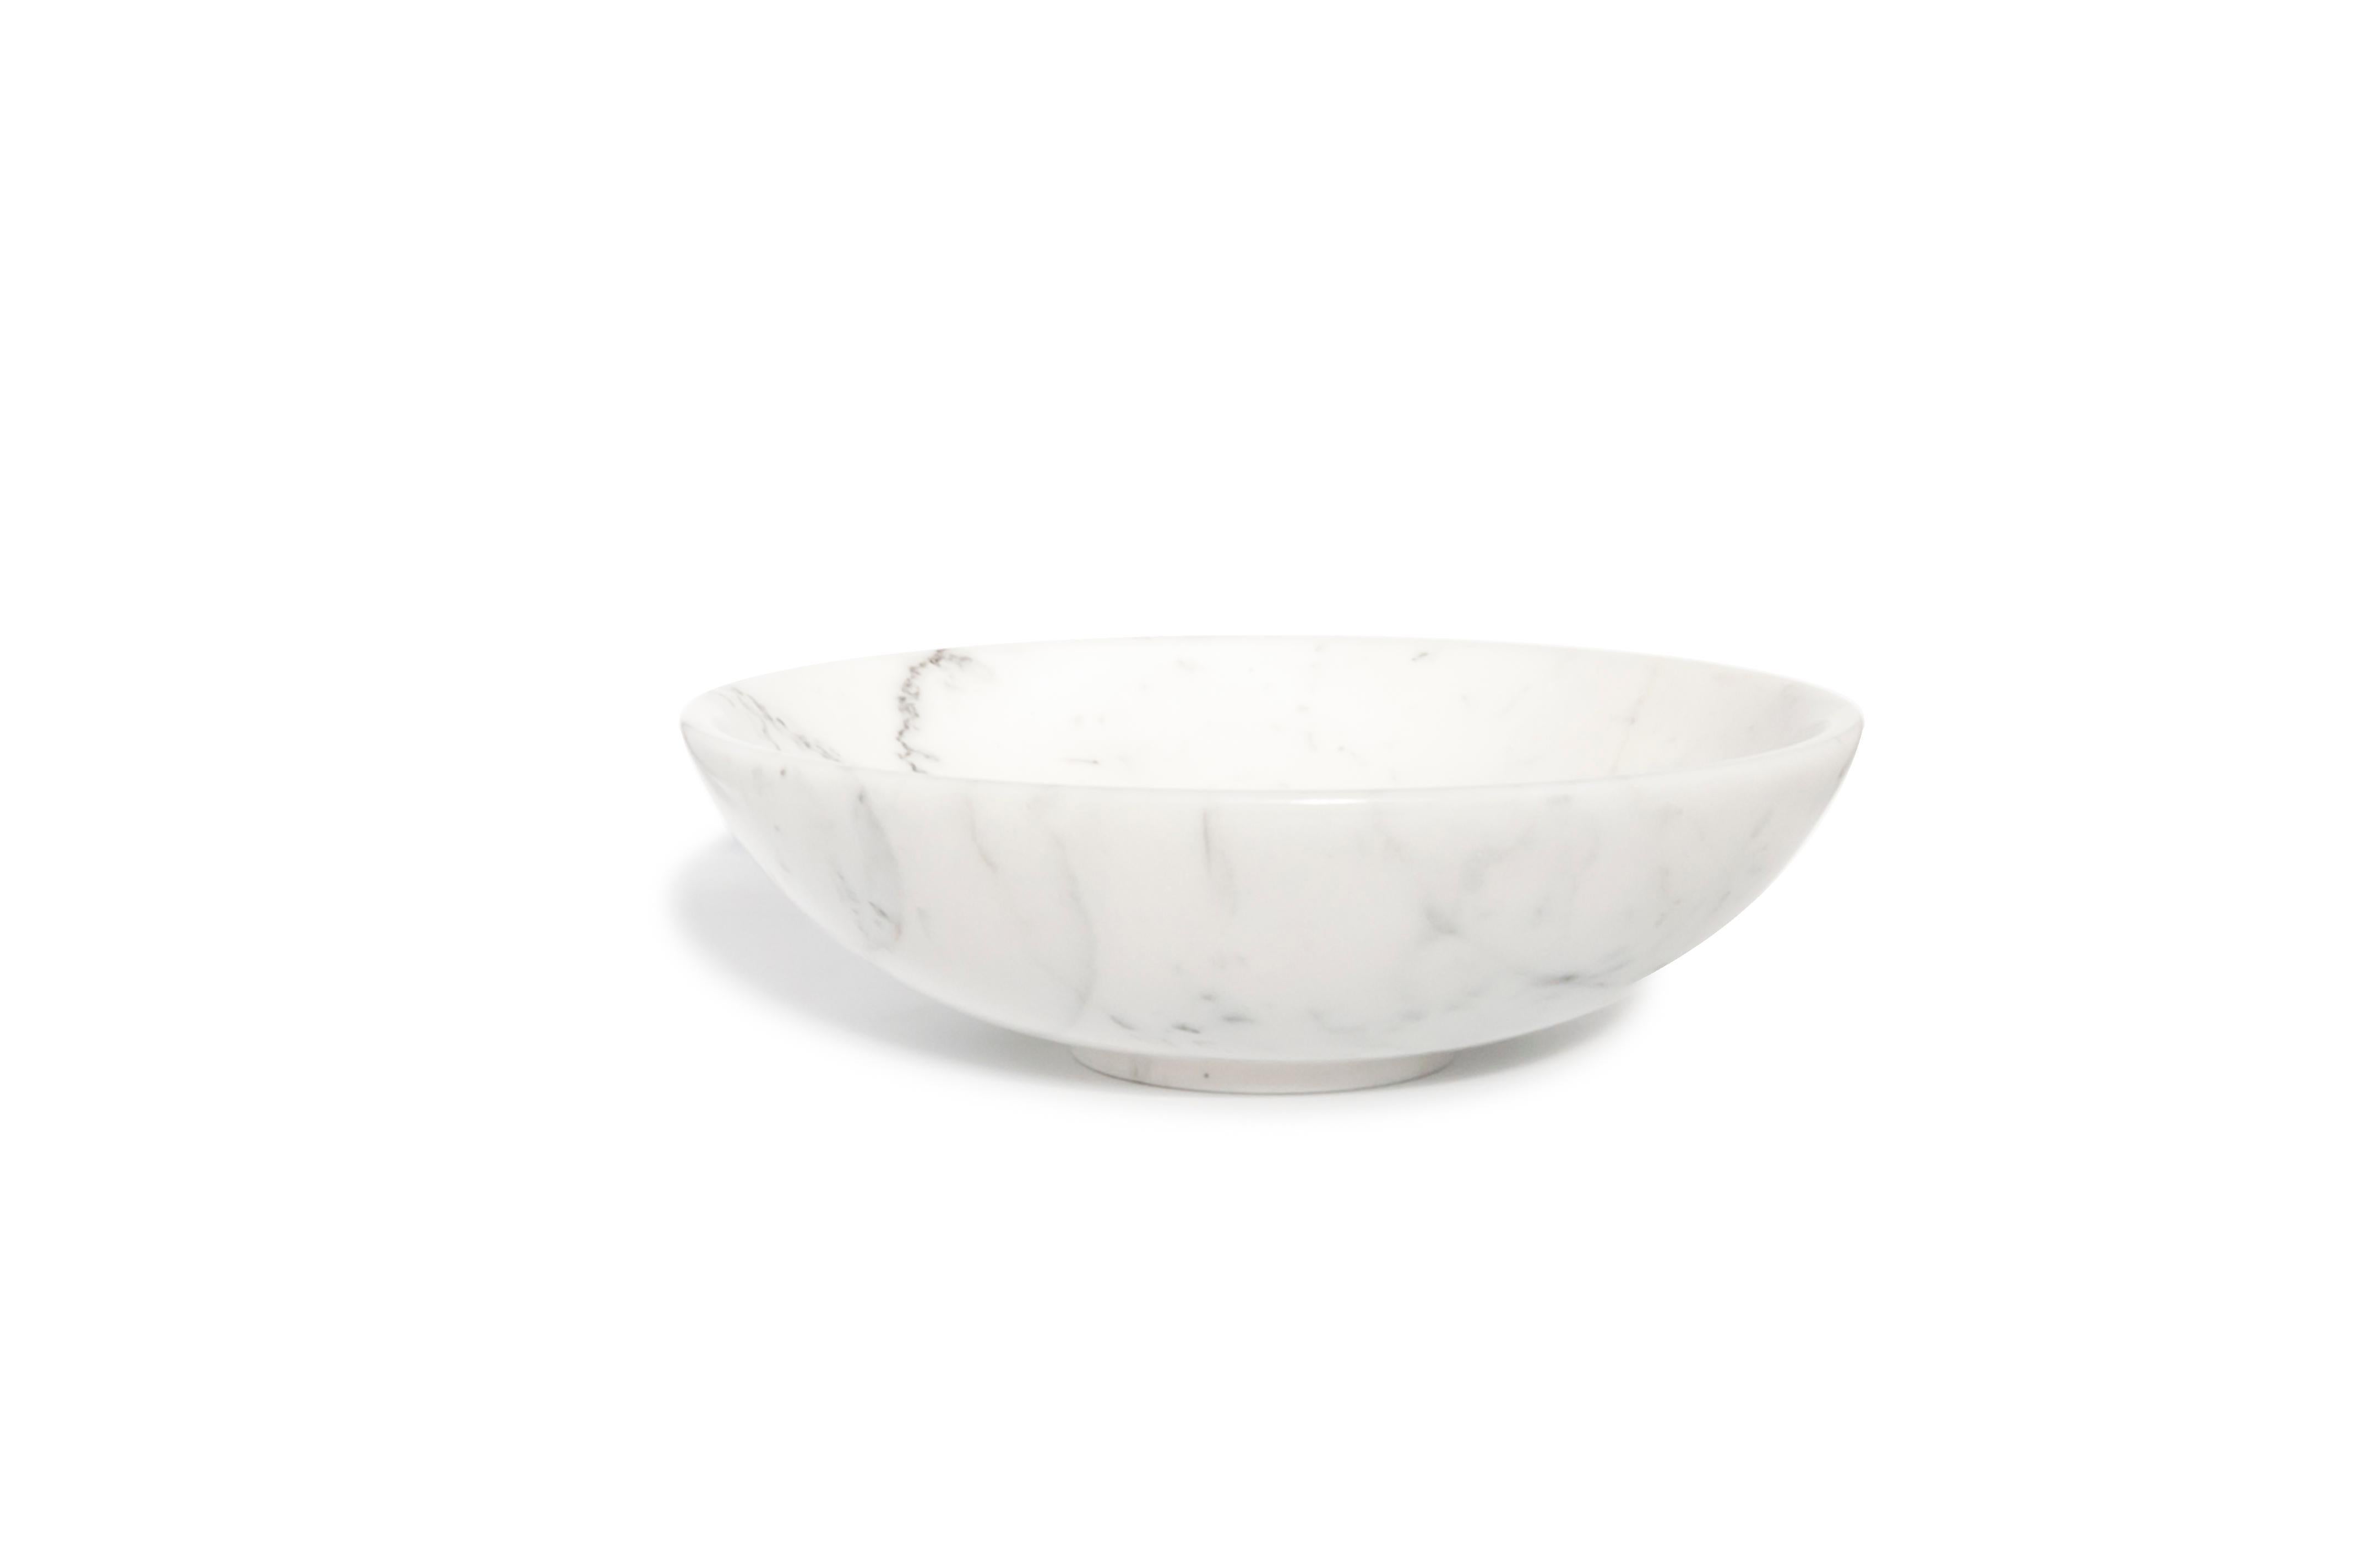 Fruit bowl in white Carrara marble. processed in Carrara, Italy. you have a 100% made in Italy product.
it is ideal to present fruit or to be used as a centrepiece.
Each piece is in a way unique (every marble block is different in veins and shades)